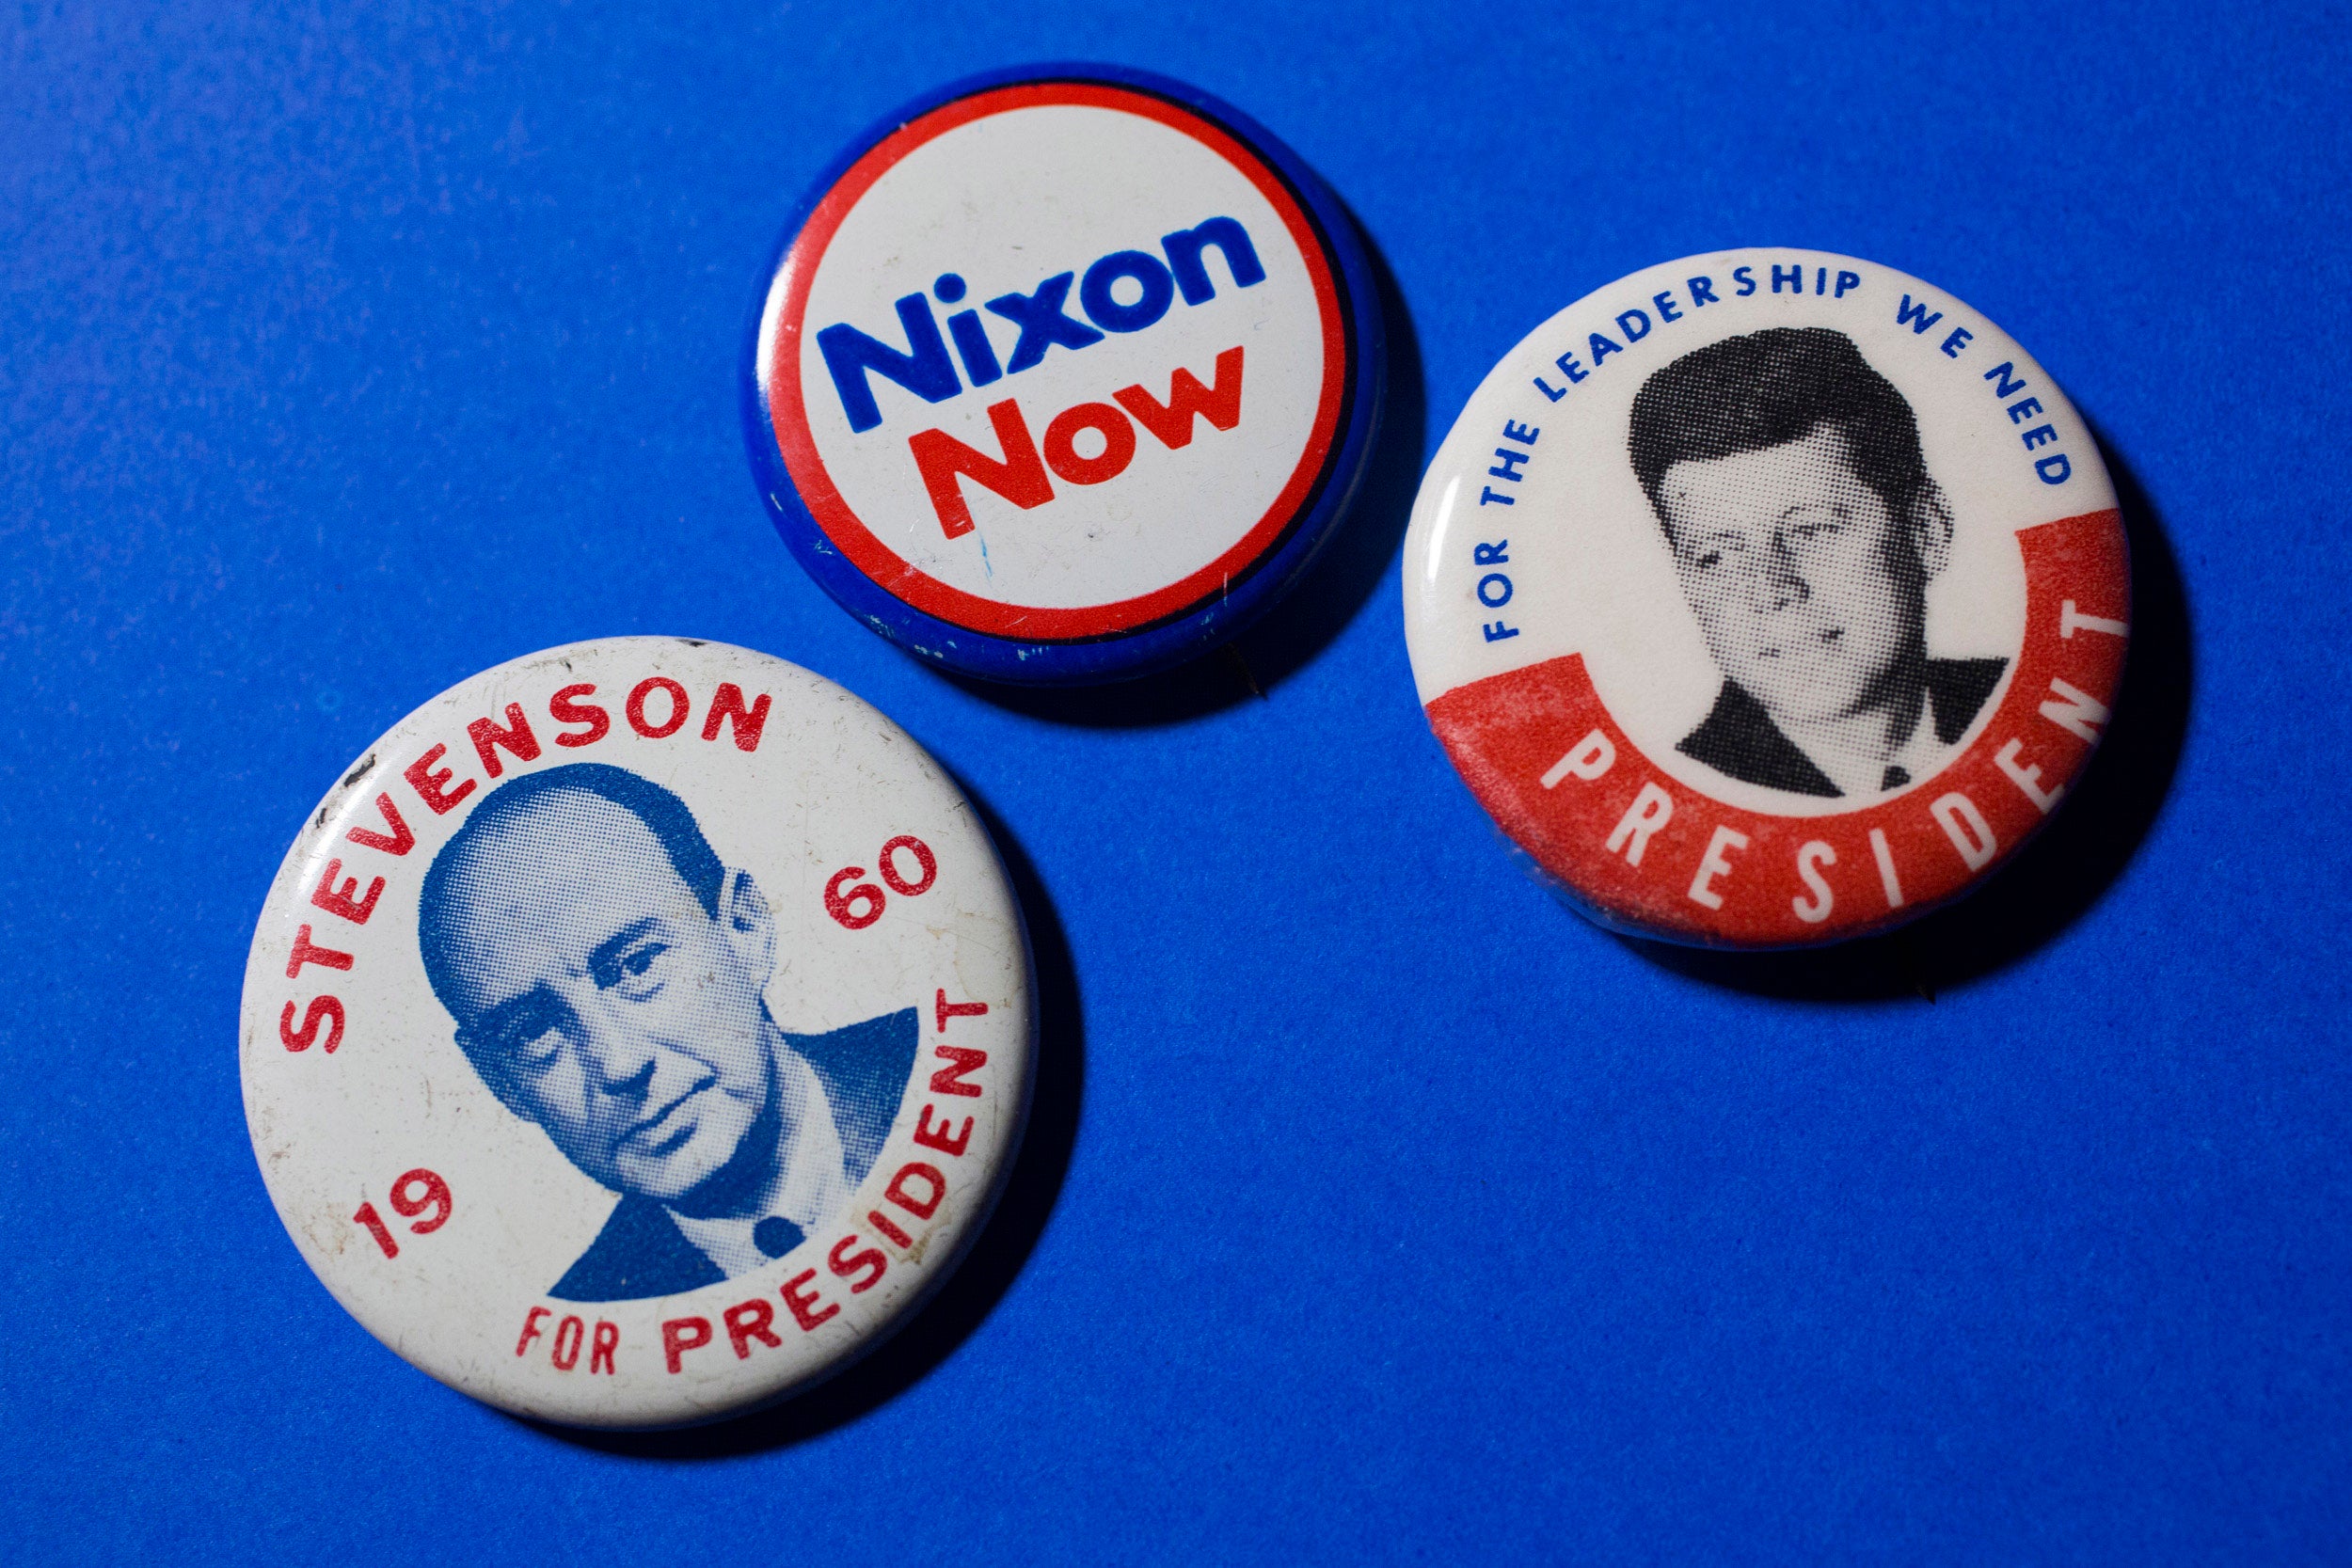 Adlai Stevenson, Richard Nixon, and John F. Kennedy represent three candidates from the 1960 presidential election.